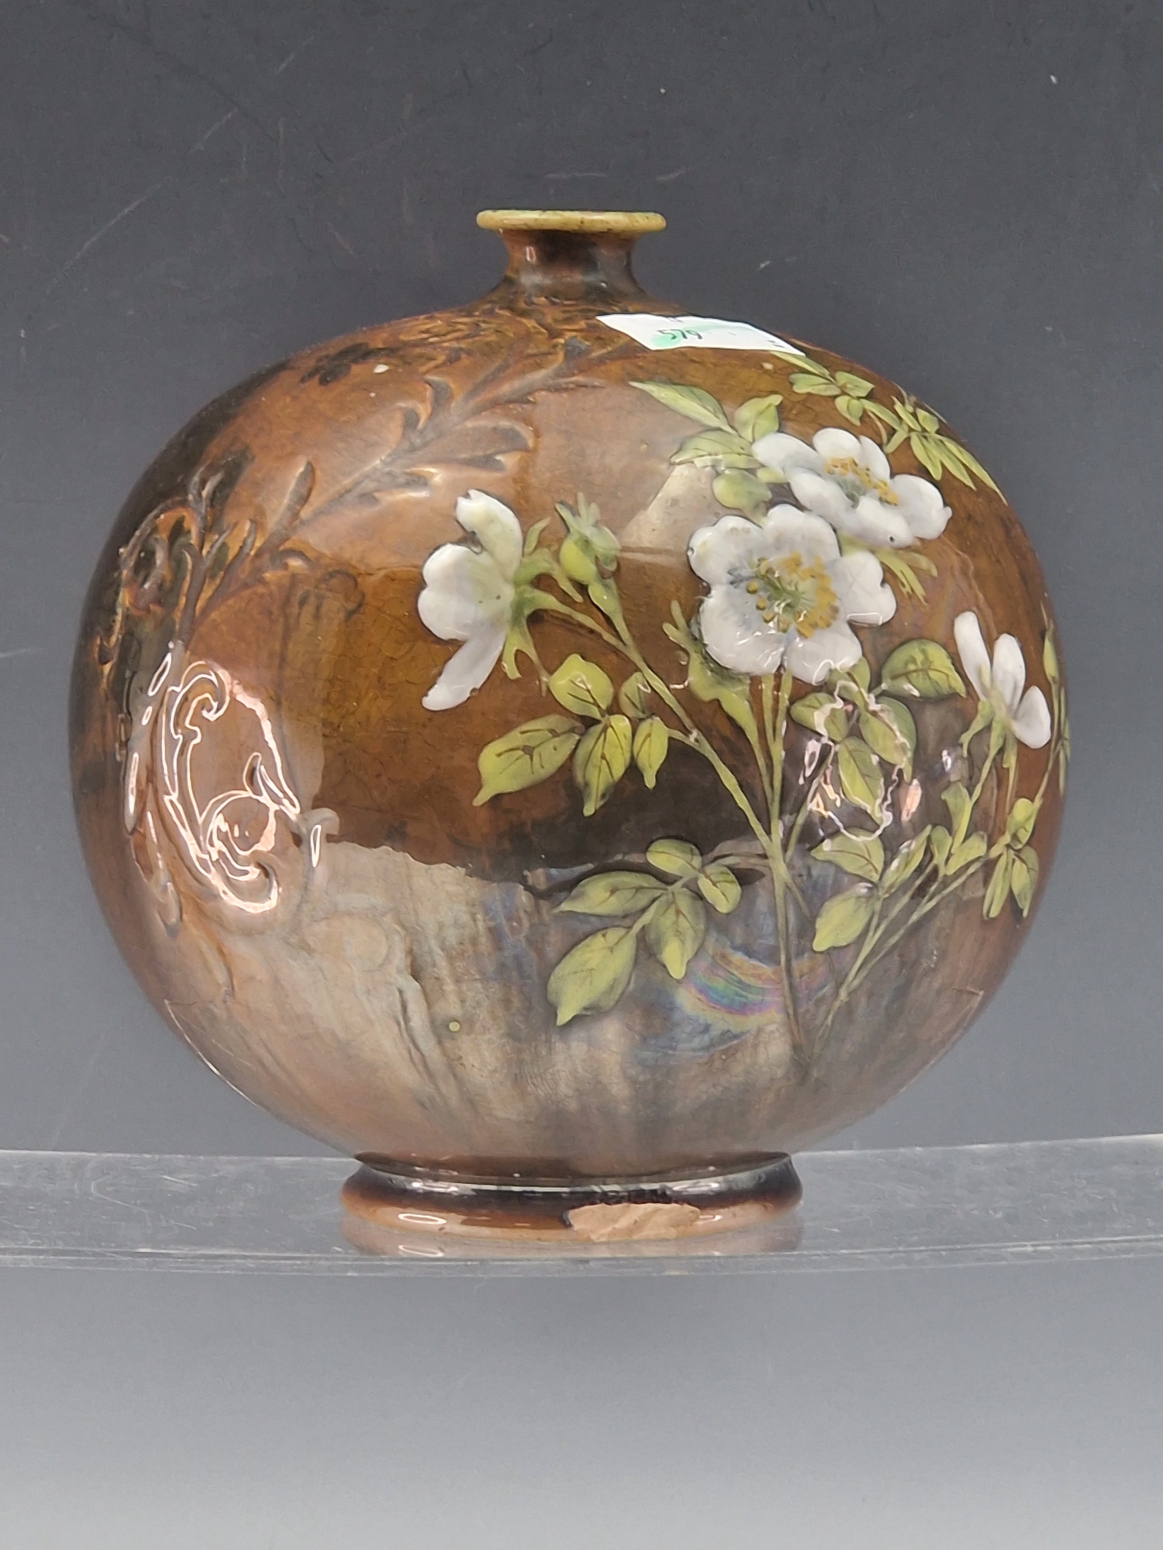 A DOULTON COMPRESSED SPHERICAL VASE PAINTED WITH WHITE AND YELLOW BLOSSOMS FLOWERING ON A STREAKY